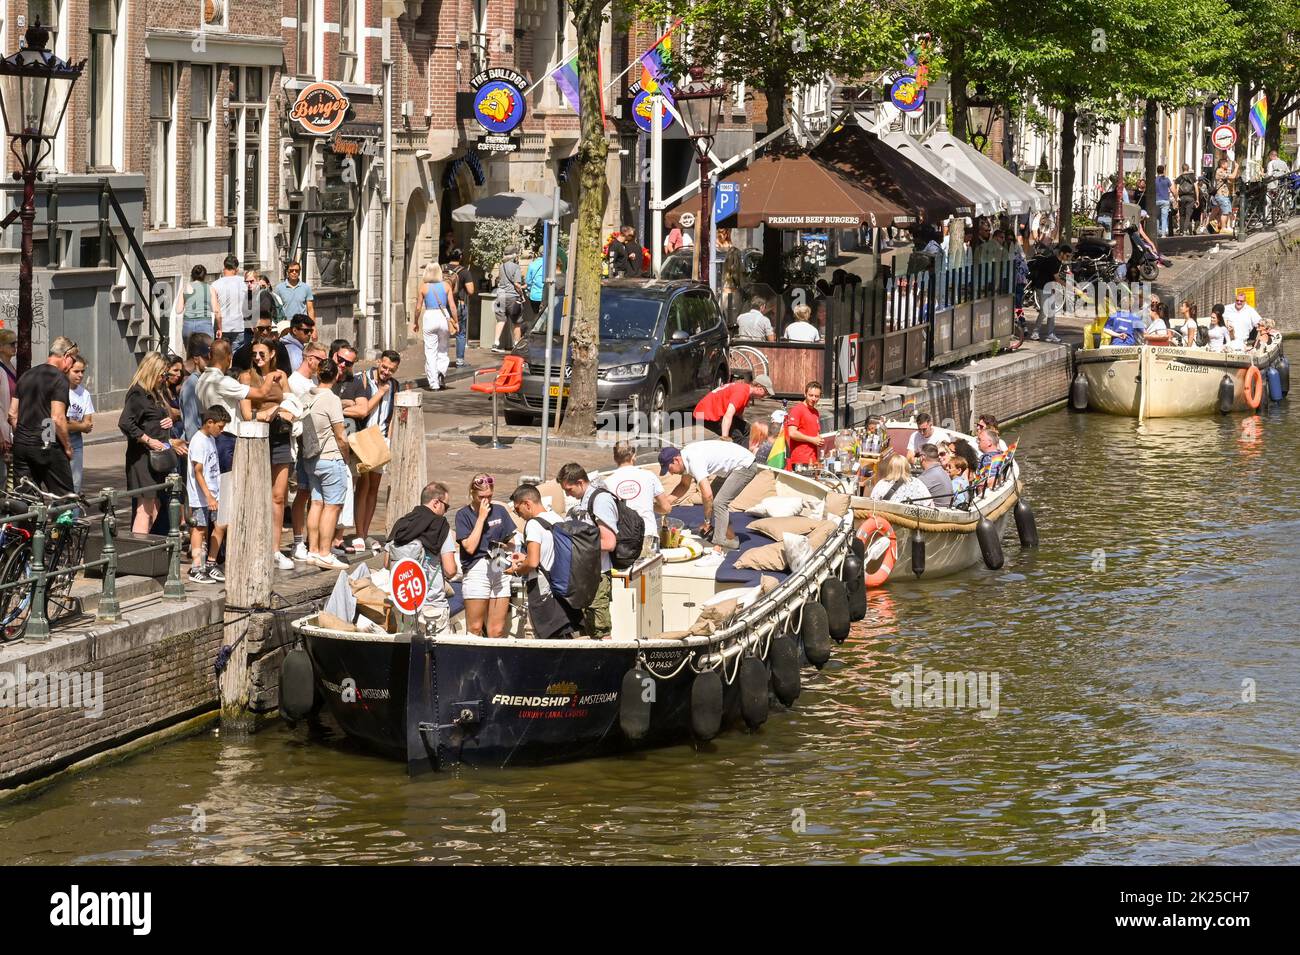 Amsterdam, Netherlands - August 2022: Tourists getting on a sightseeing canal boat in the city centre Stock Photo